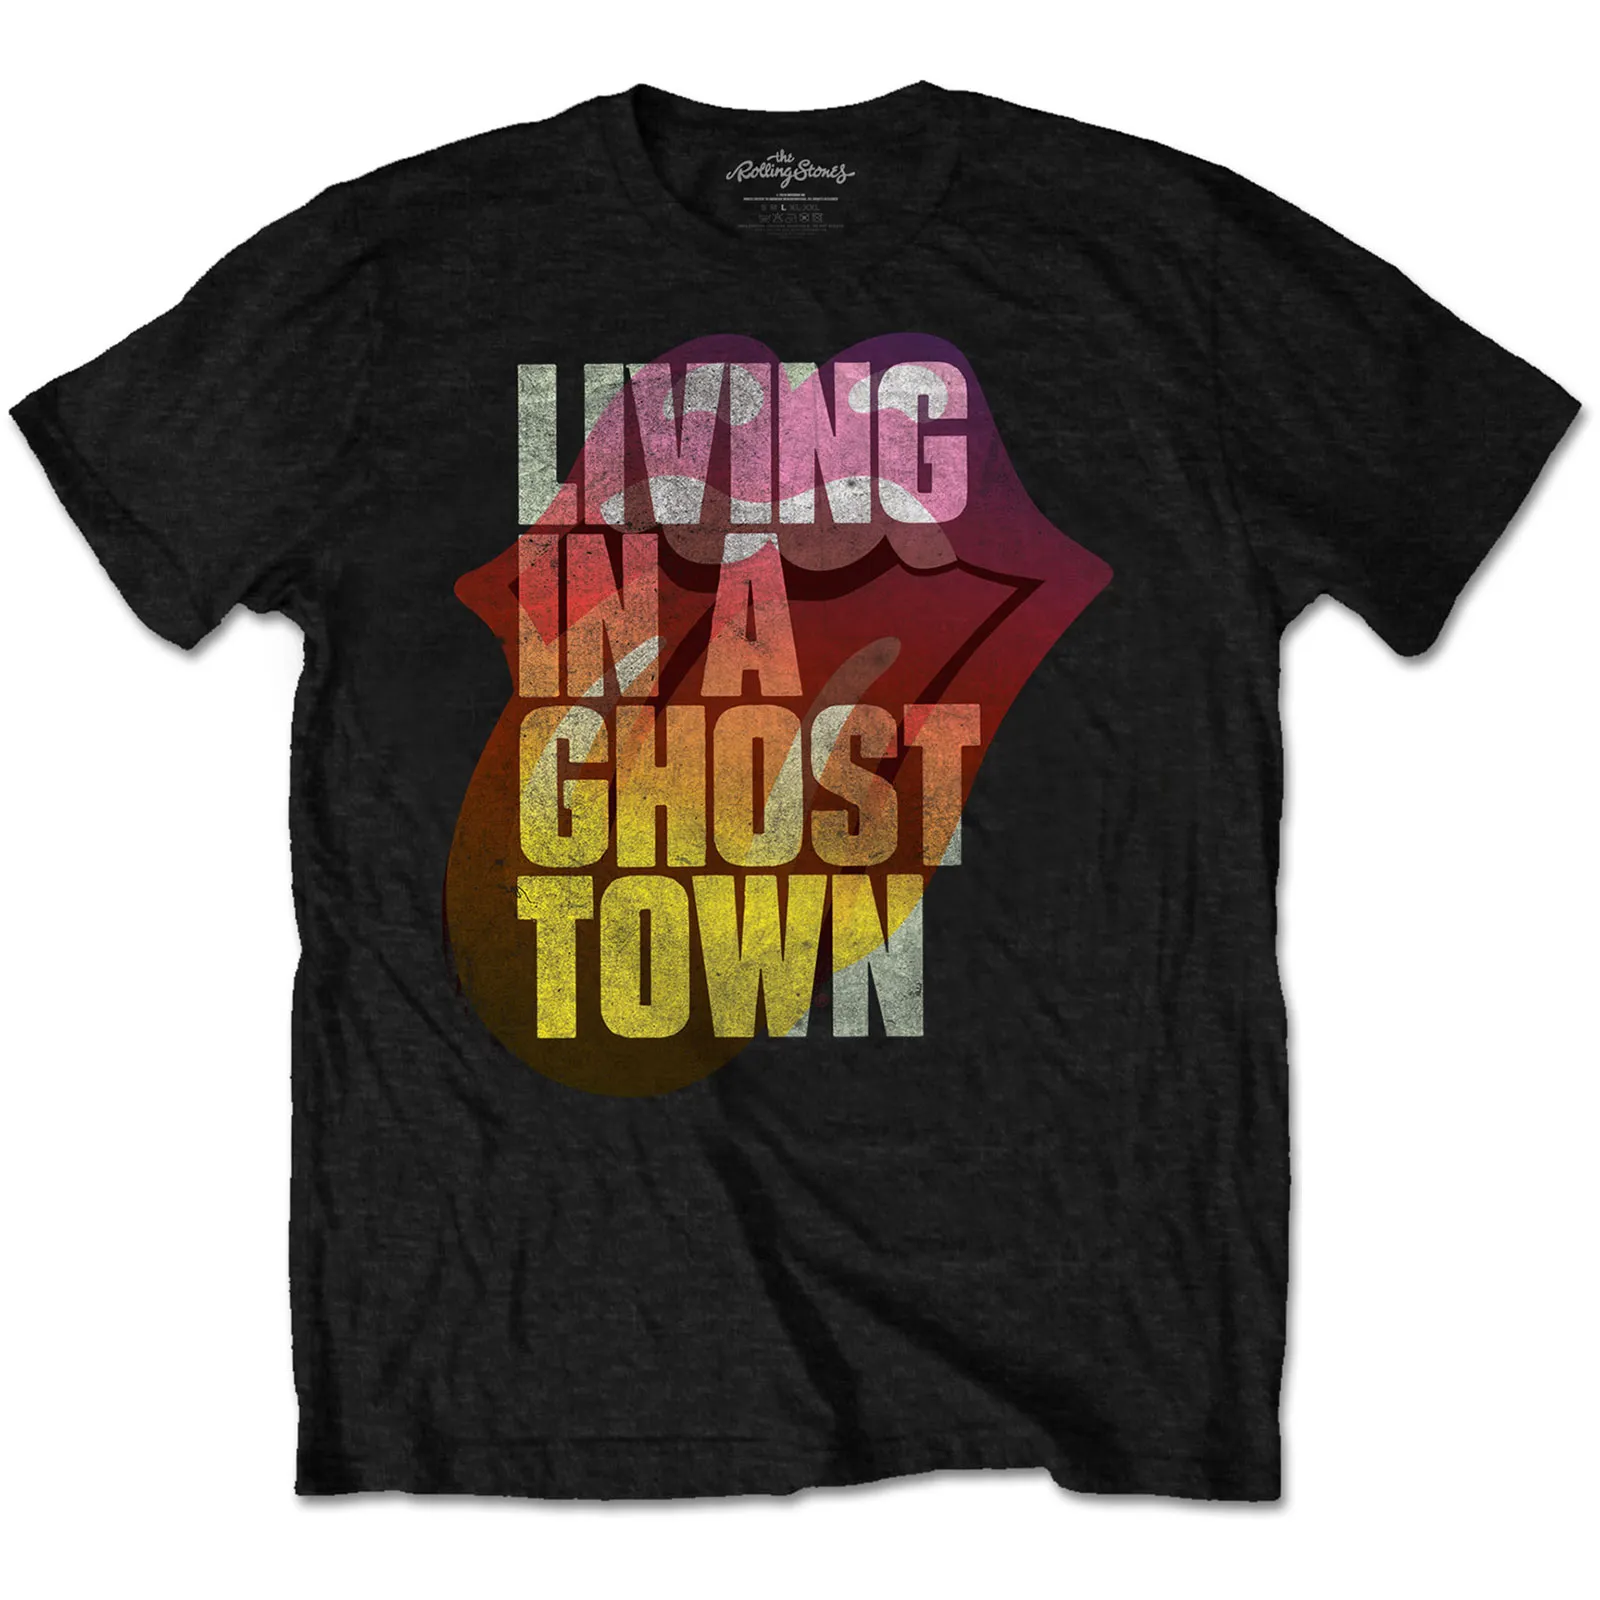 The Rolling Stones - Unisex T-Shirt Ghost Town artwork